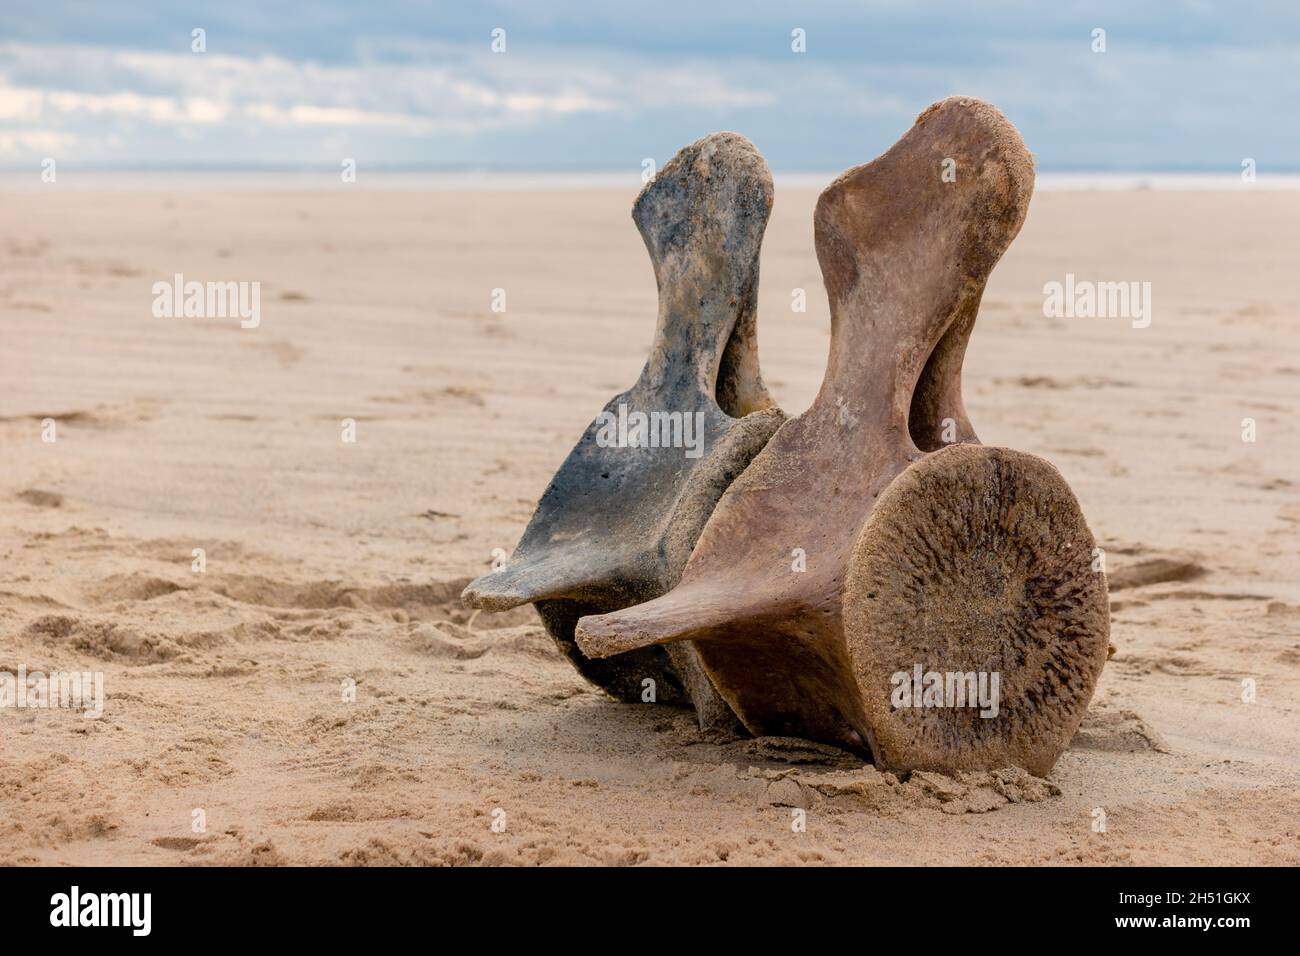 Two whale vertebrae washed ashore on the beach Stock Photo